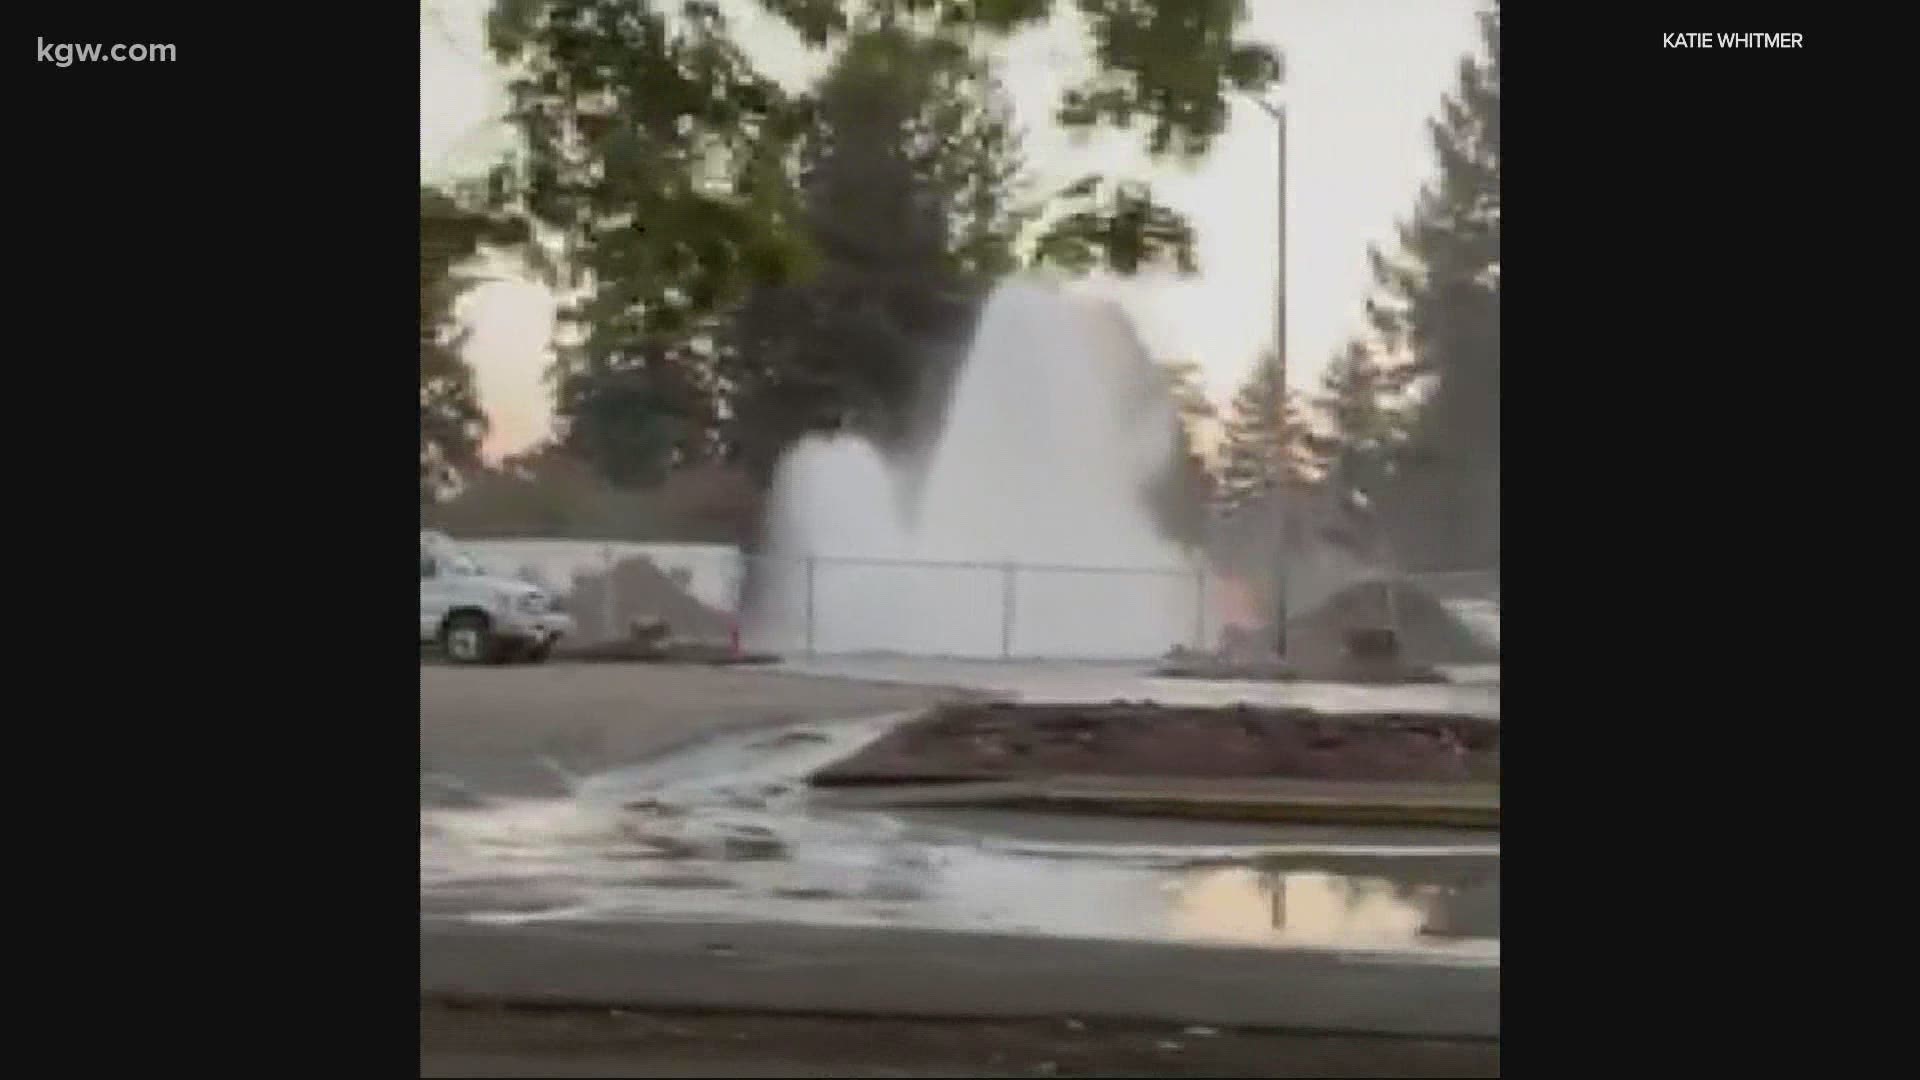 More than a million gallons of water spilled into the Fort Vancouver Regional Public Library after a private construction crew broke a water main. Devon Haskins repo